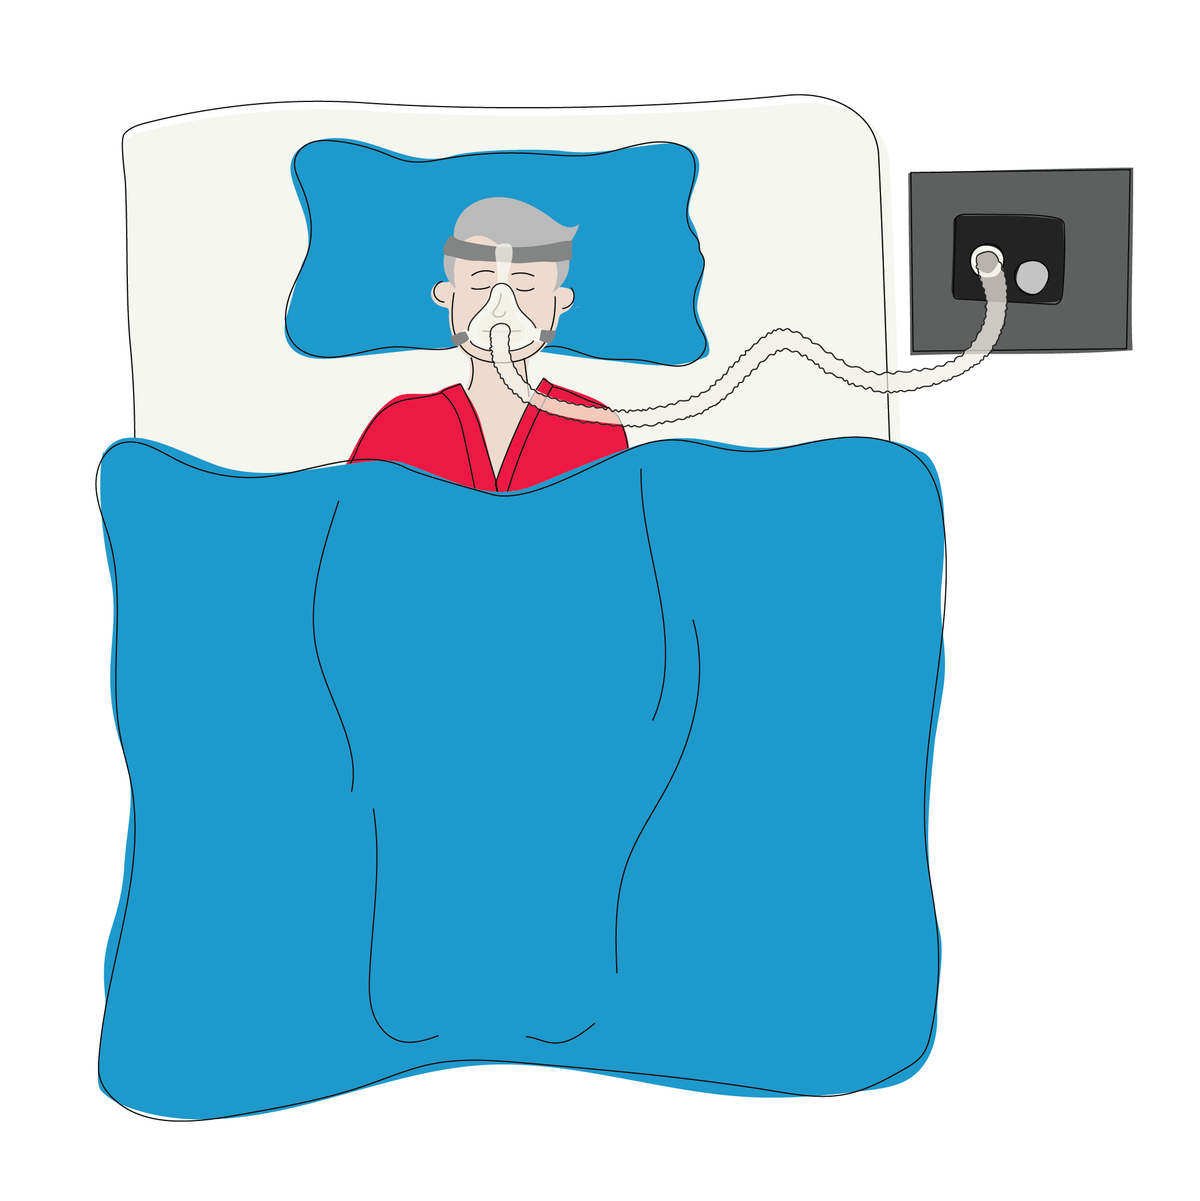 CPAP therapy for sleep apnea